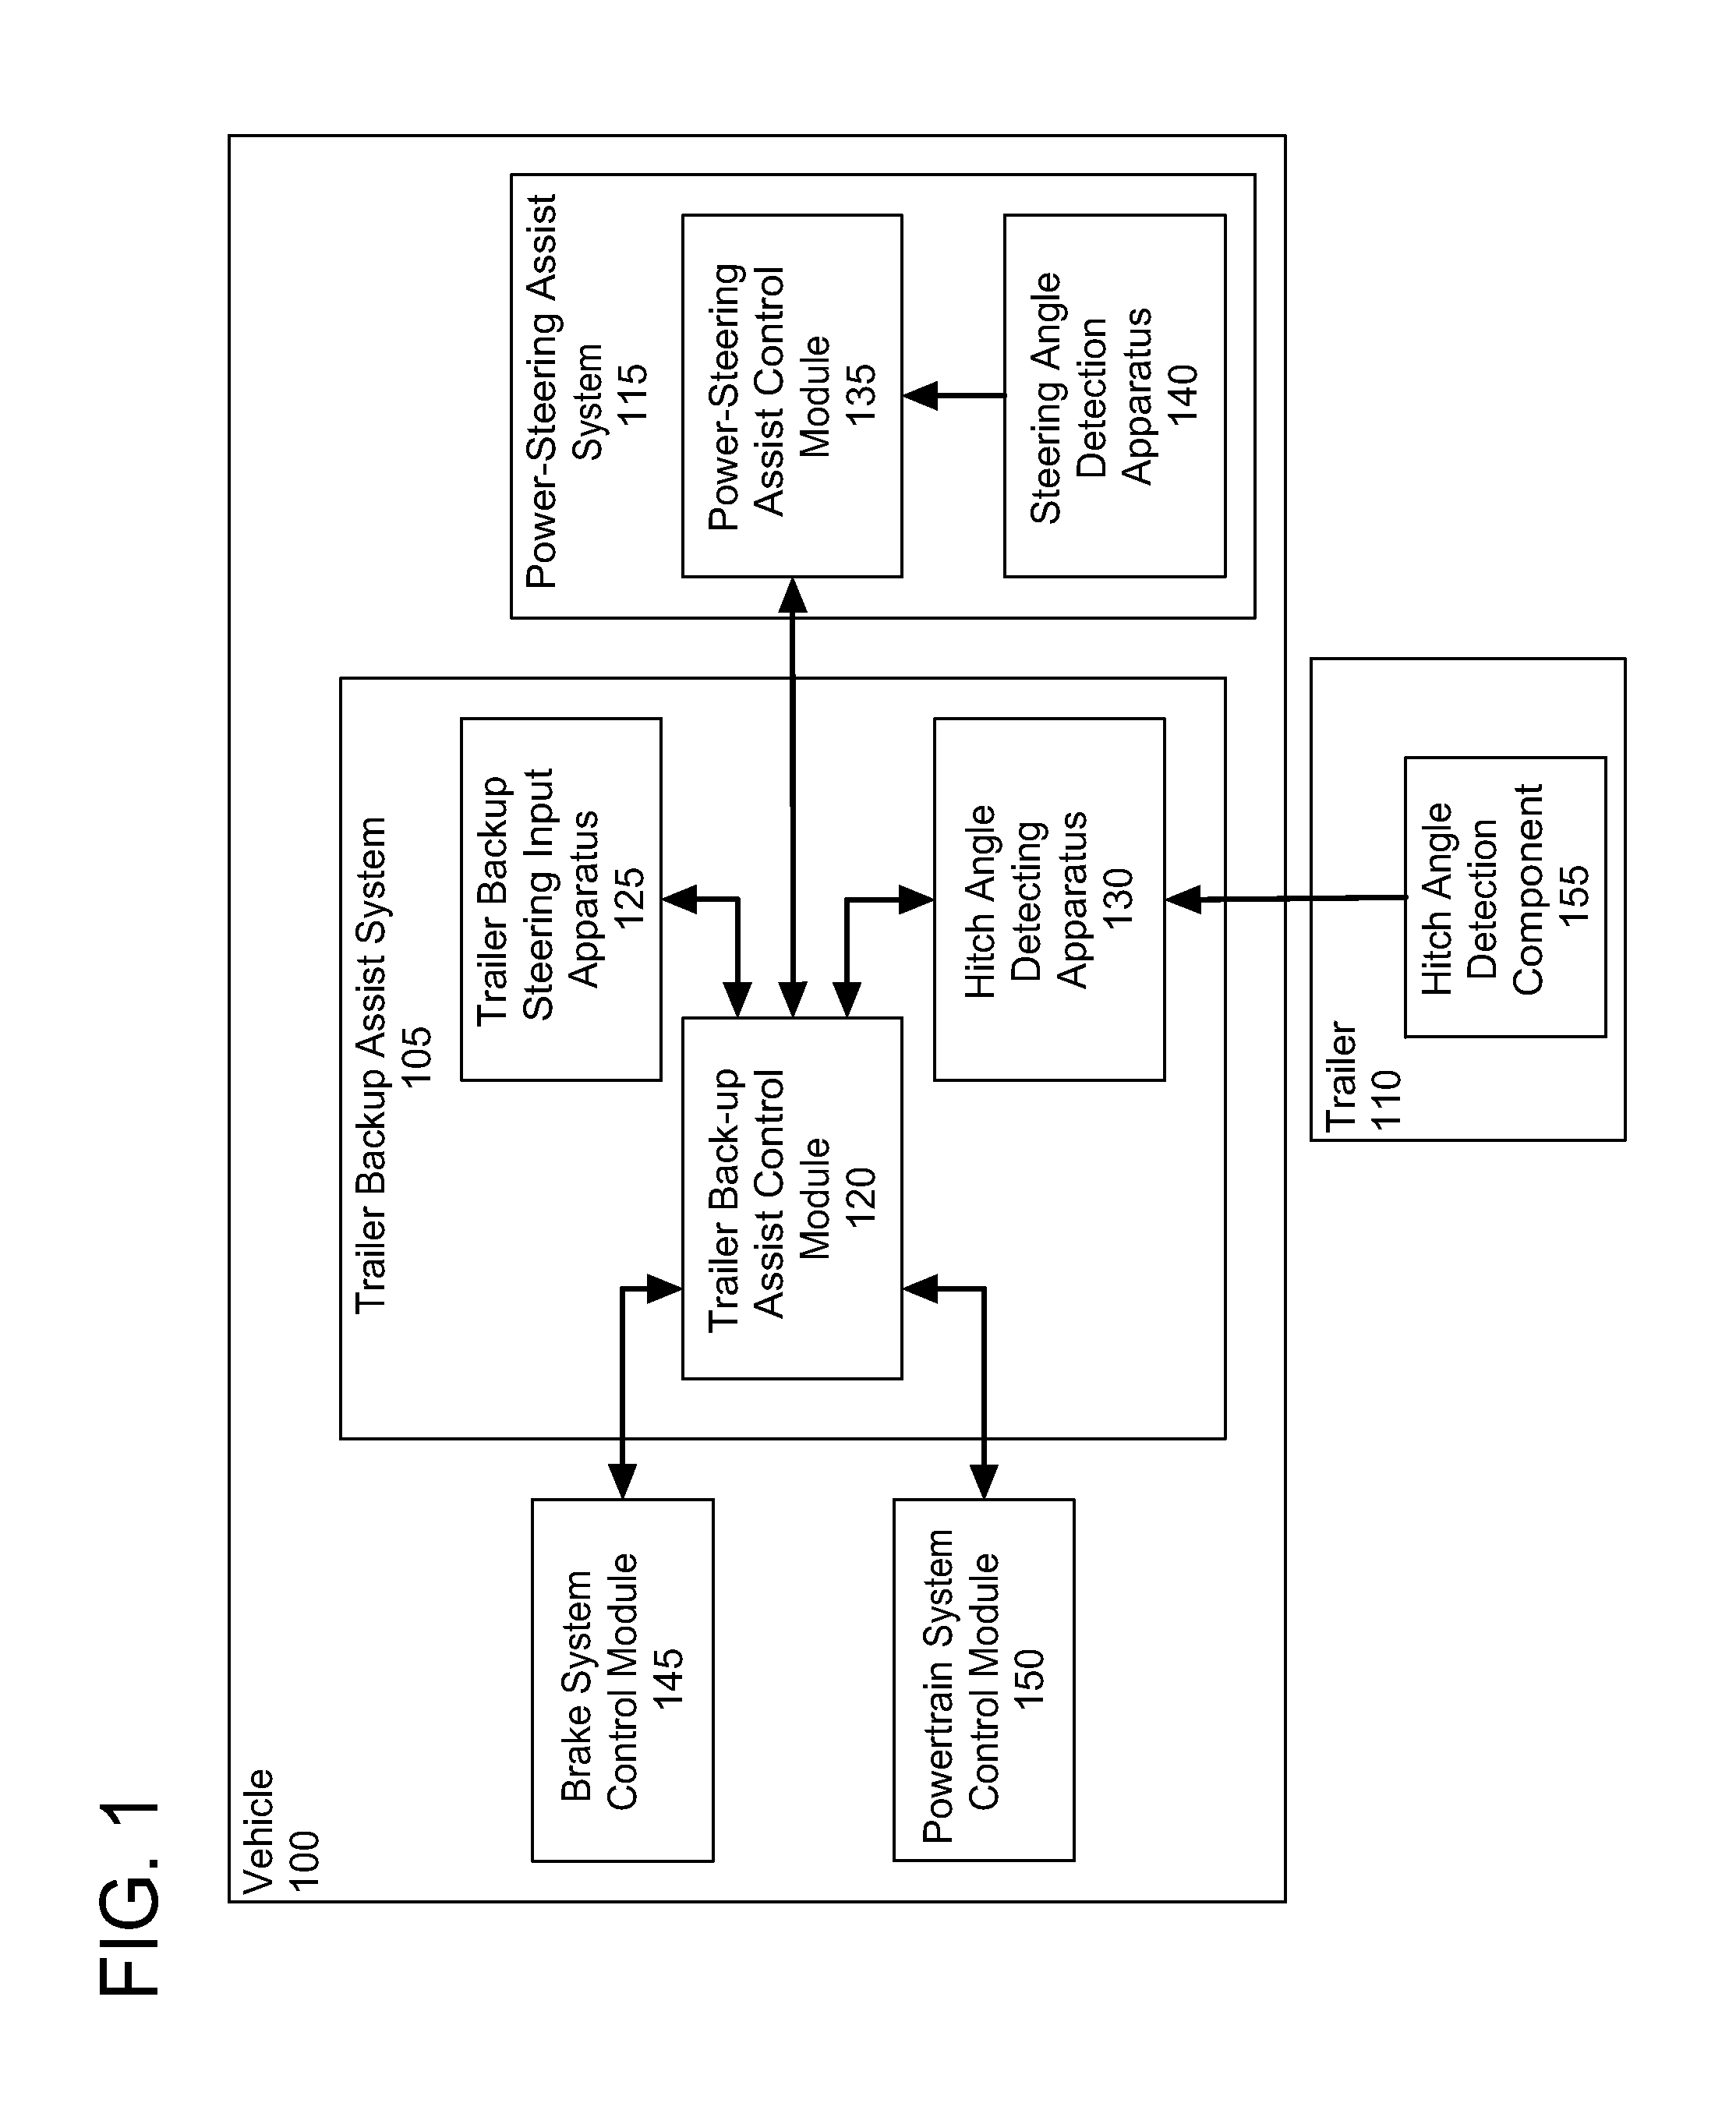 Trailer monitoring system and method